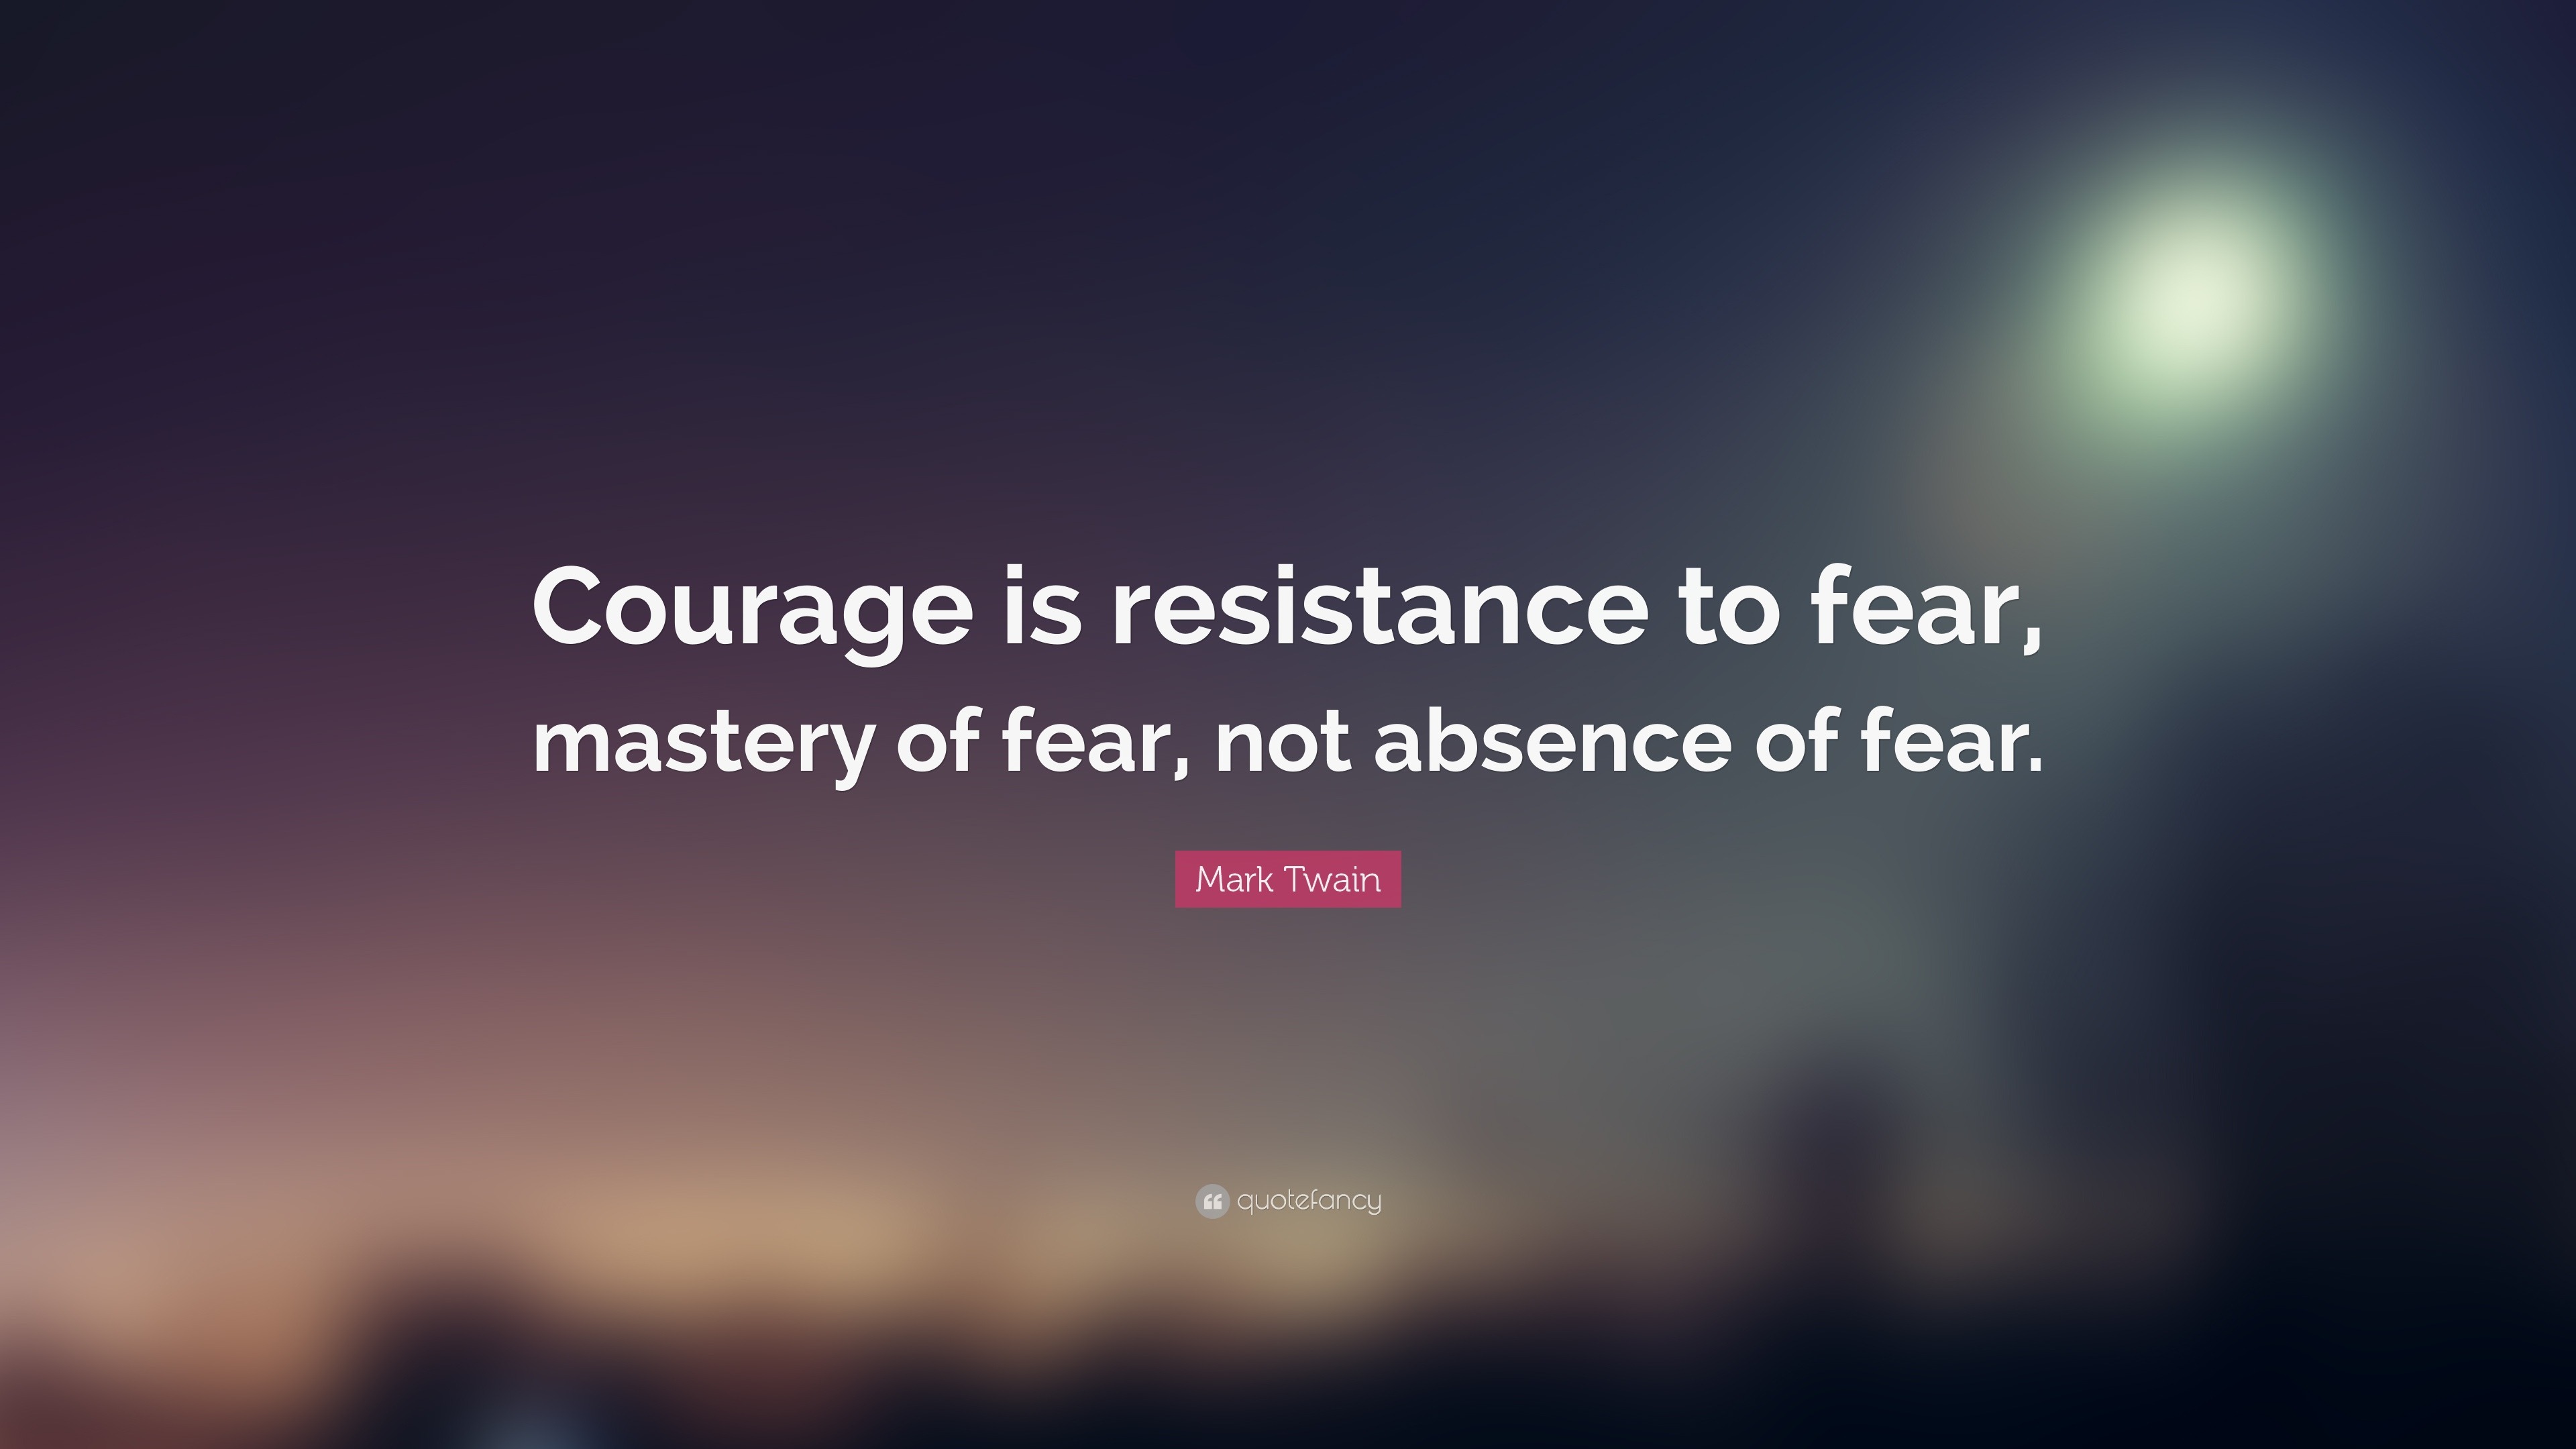 Mark Twain Quote: "Courage is resistance to fear, mastery of fear, not absence of fear." (24 ...